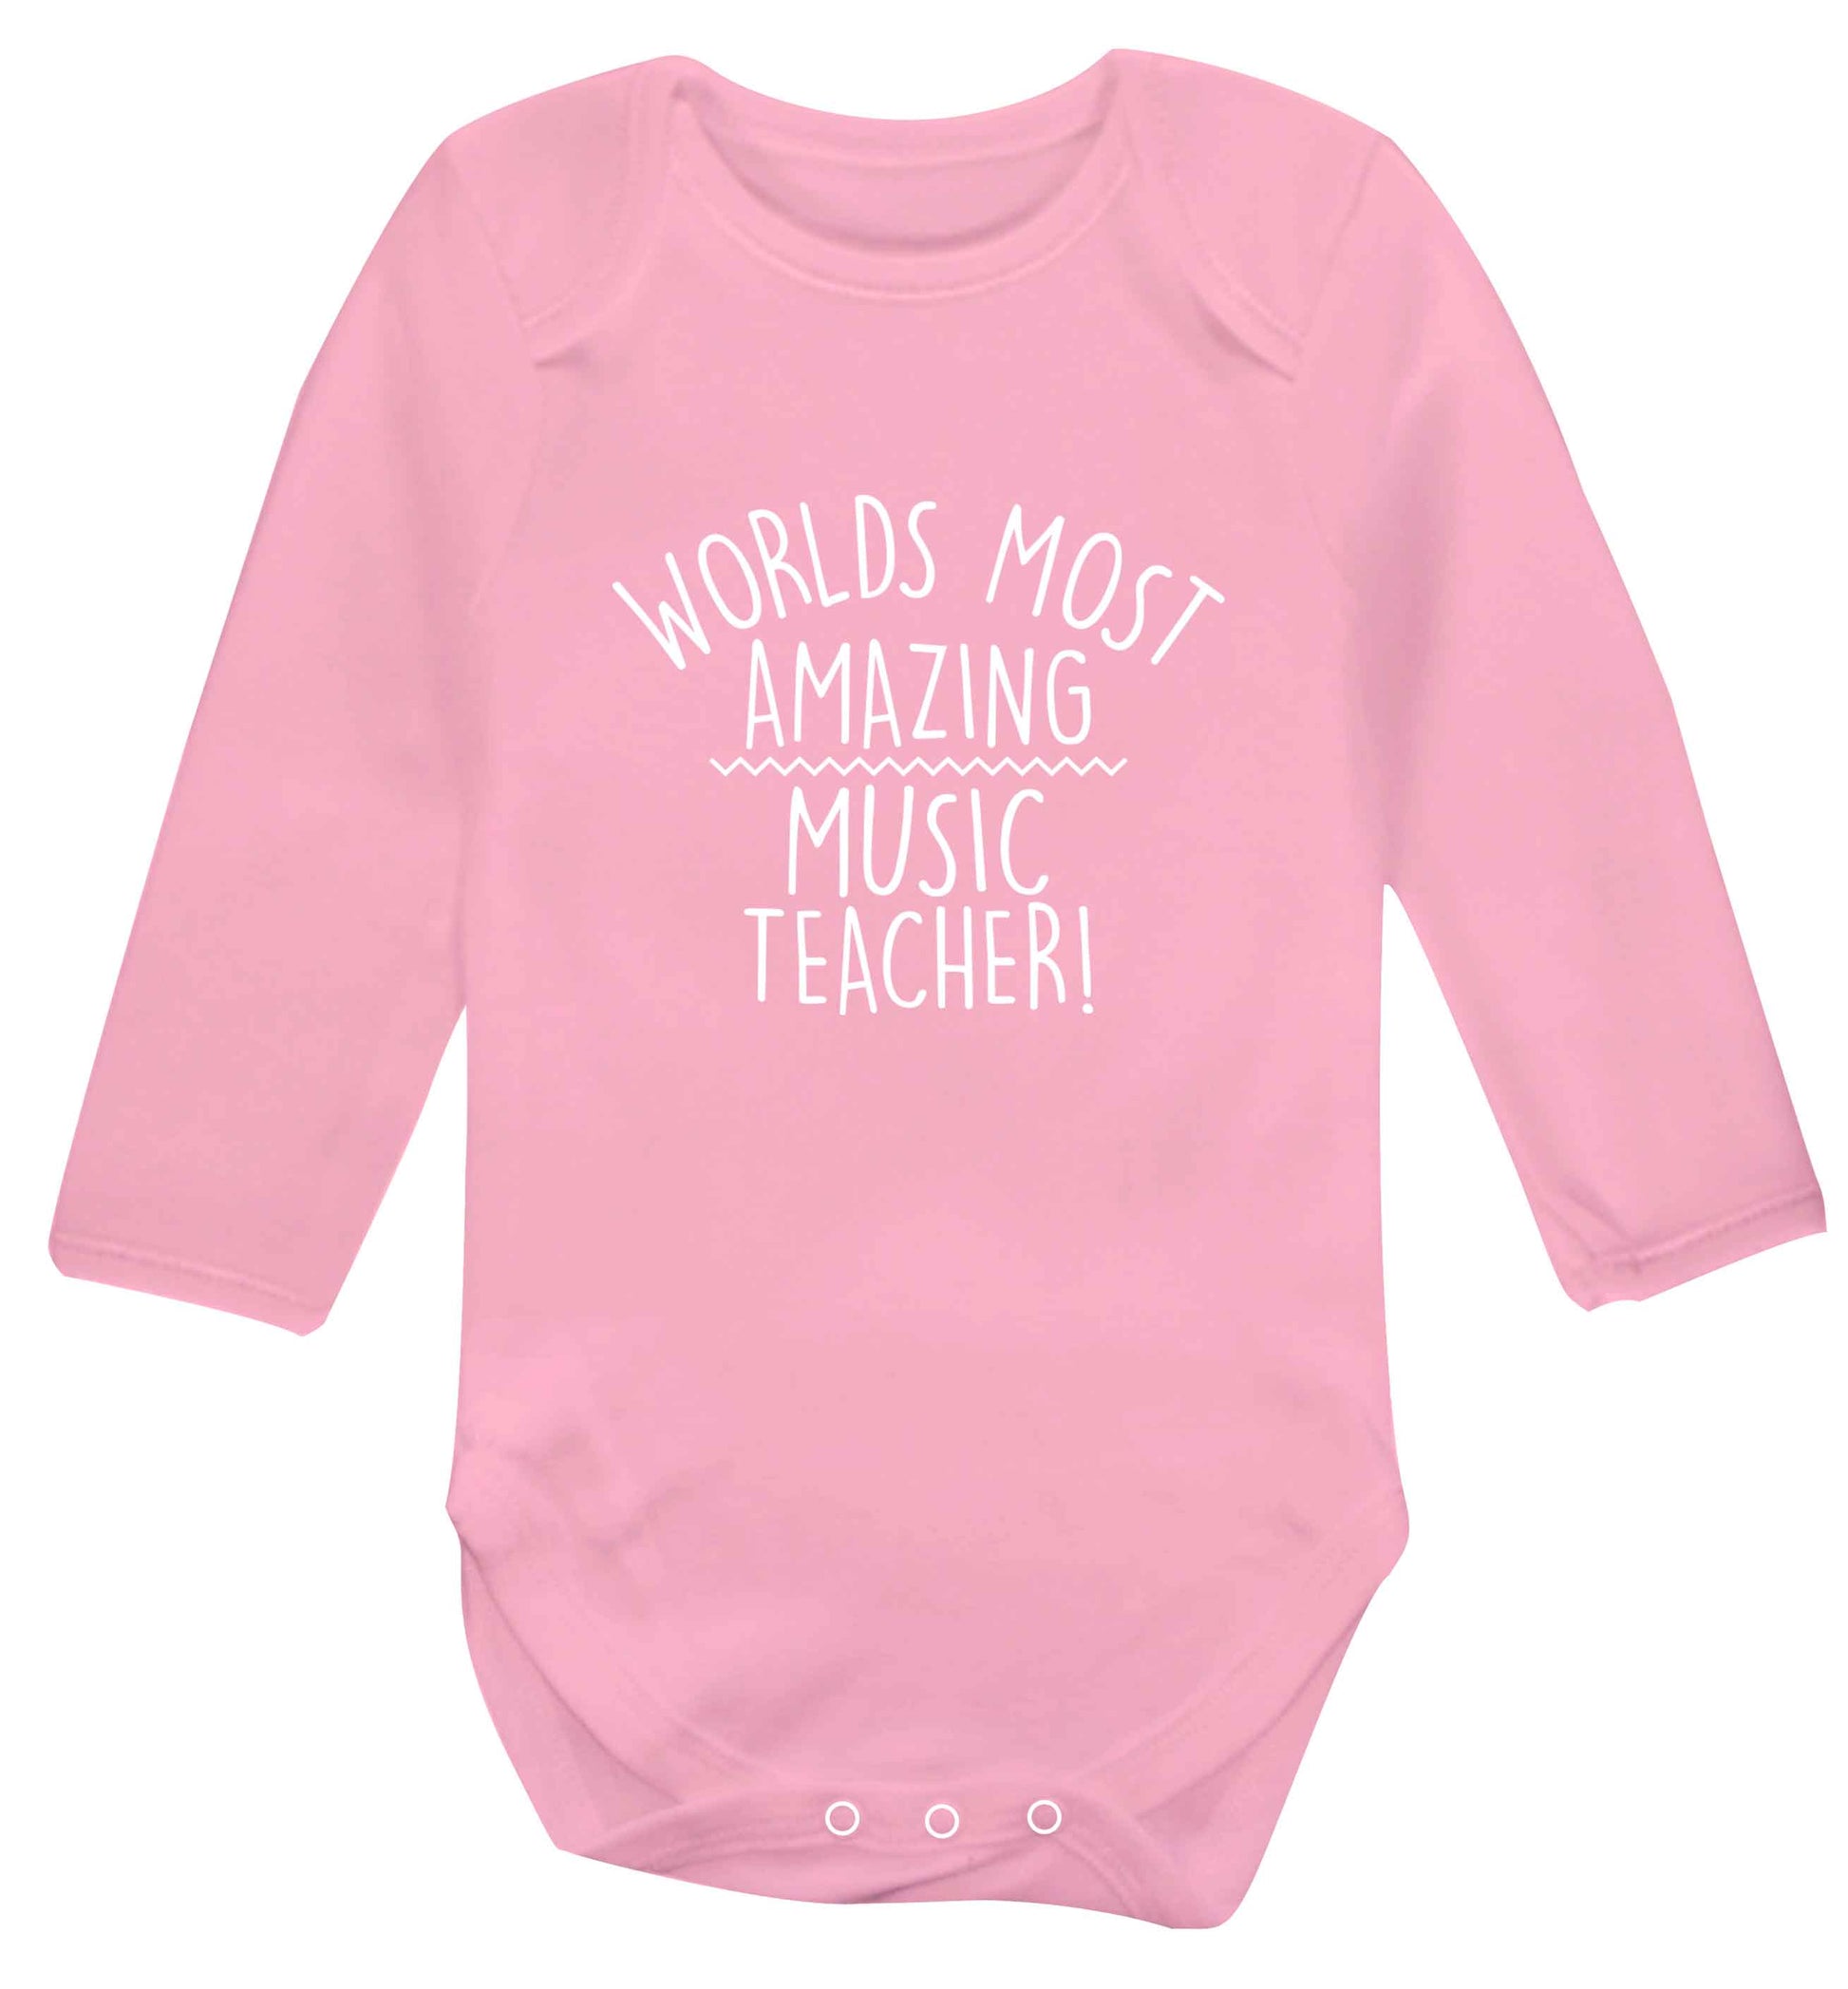 Worlds most amazing music teacher baby vest long sleeved pale pink 6-12 months